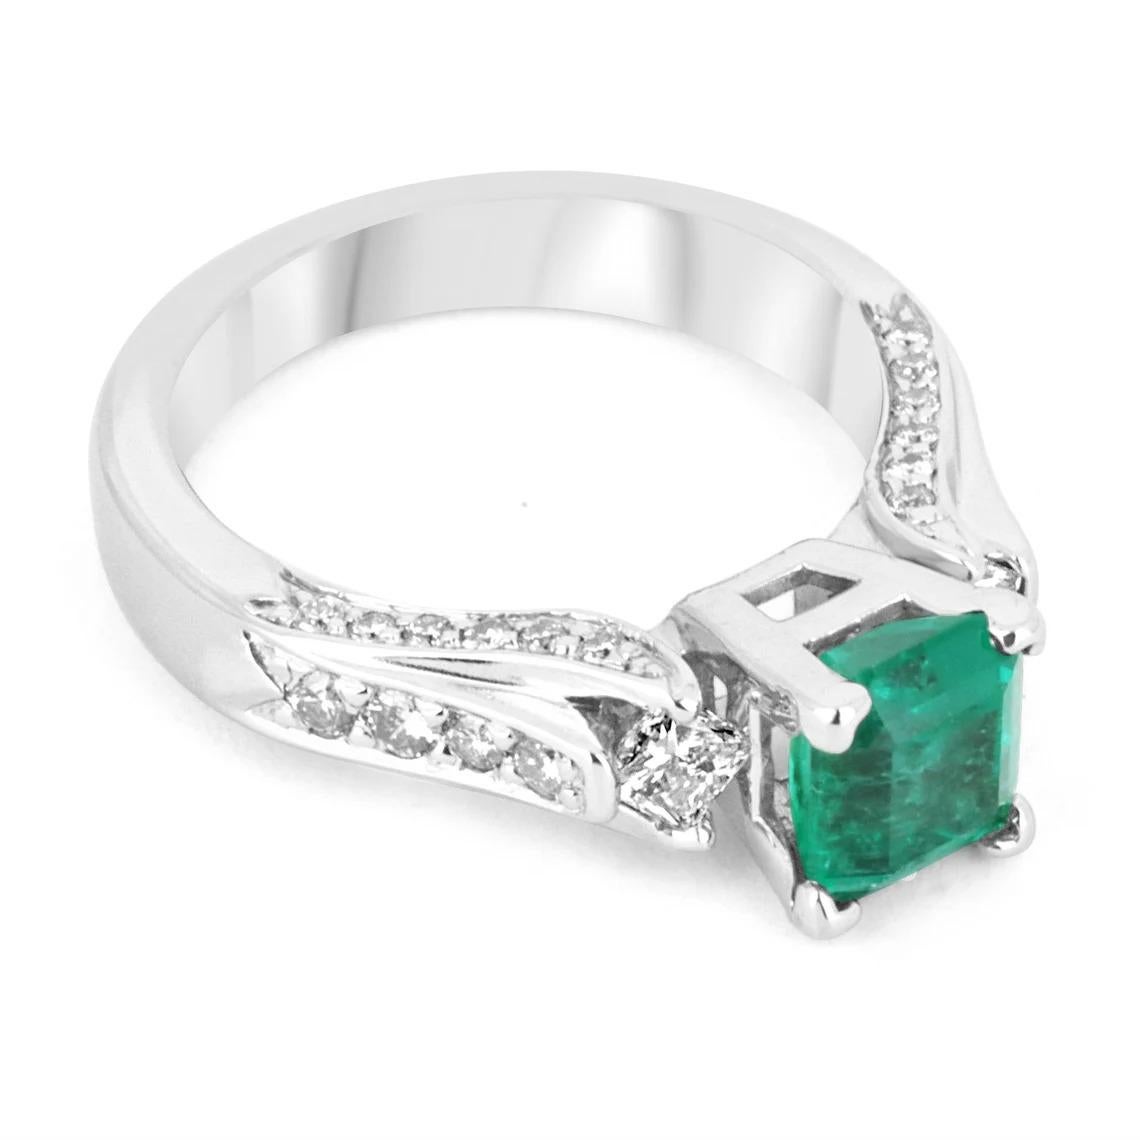 Featured here is a classic emerald and diamond engagement ring. Expertly handcrafted in gleaming 14K white gold; this ring features one fine quality emerald in a four-prong setting. The center is an extraordinary gemstone and has profound color